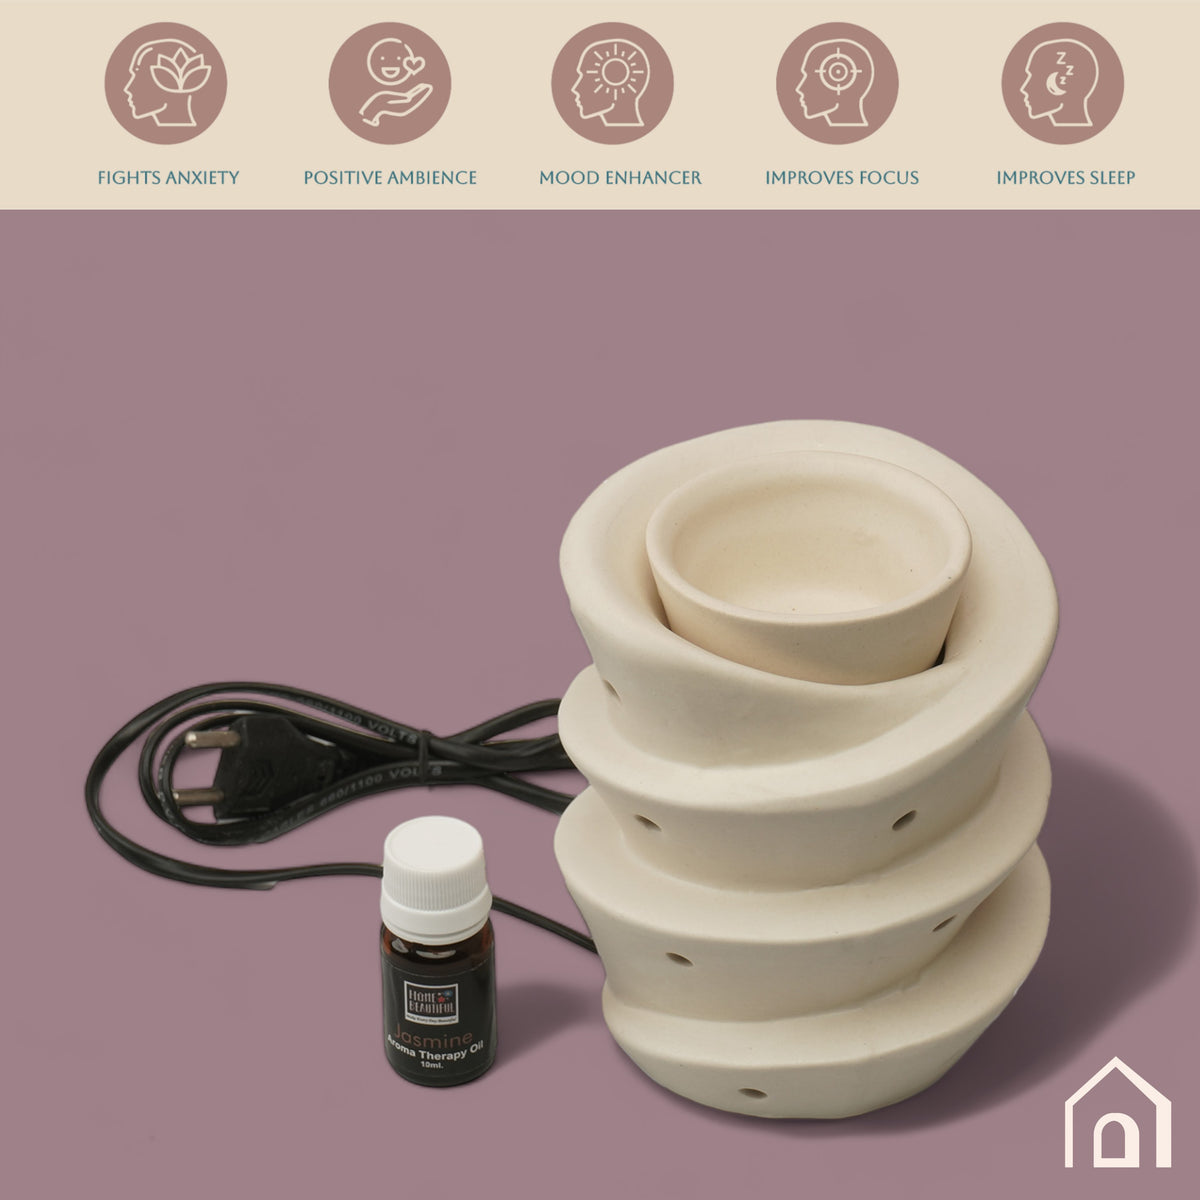 Claymistry Ceramic Electric White Aroma Spiral Lamp Diffuser | 14cm * 14cm * 16cm | Matte Finish | Aroma Oil Burner for Aromatherapy | Home Decor and Fragrance with Aroma Oil (Jasmine Fragrance 10 ml)